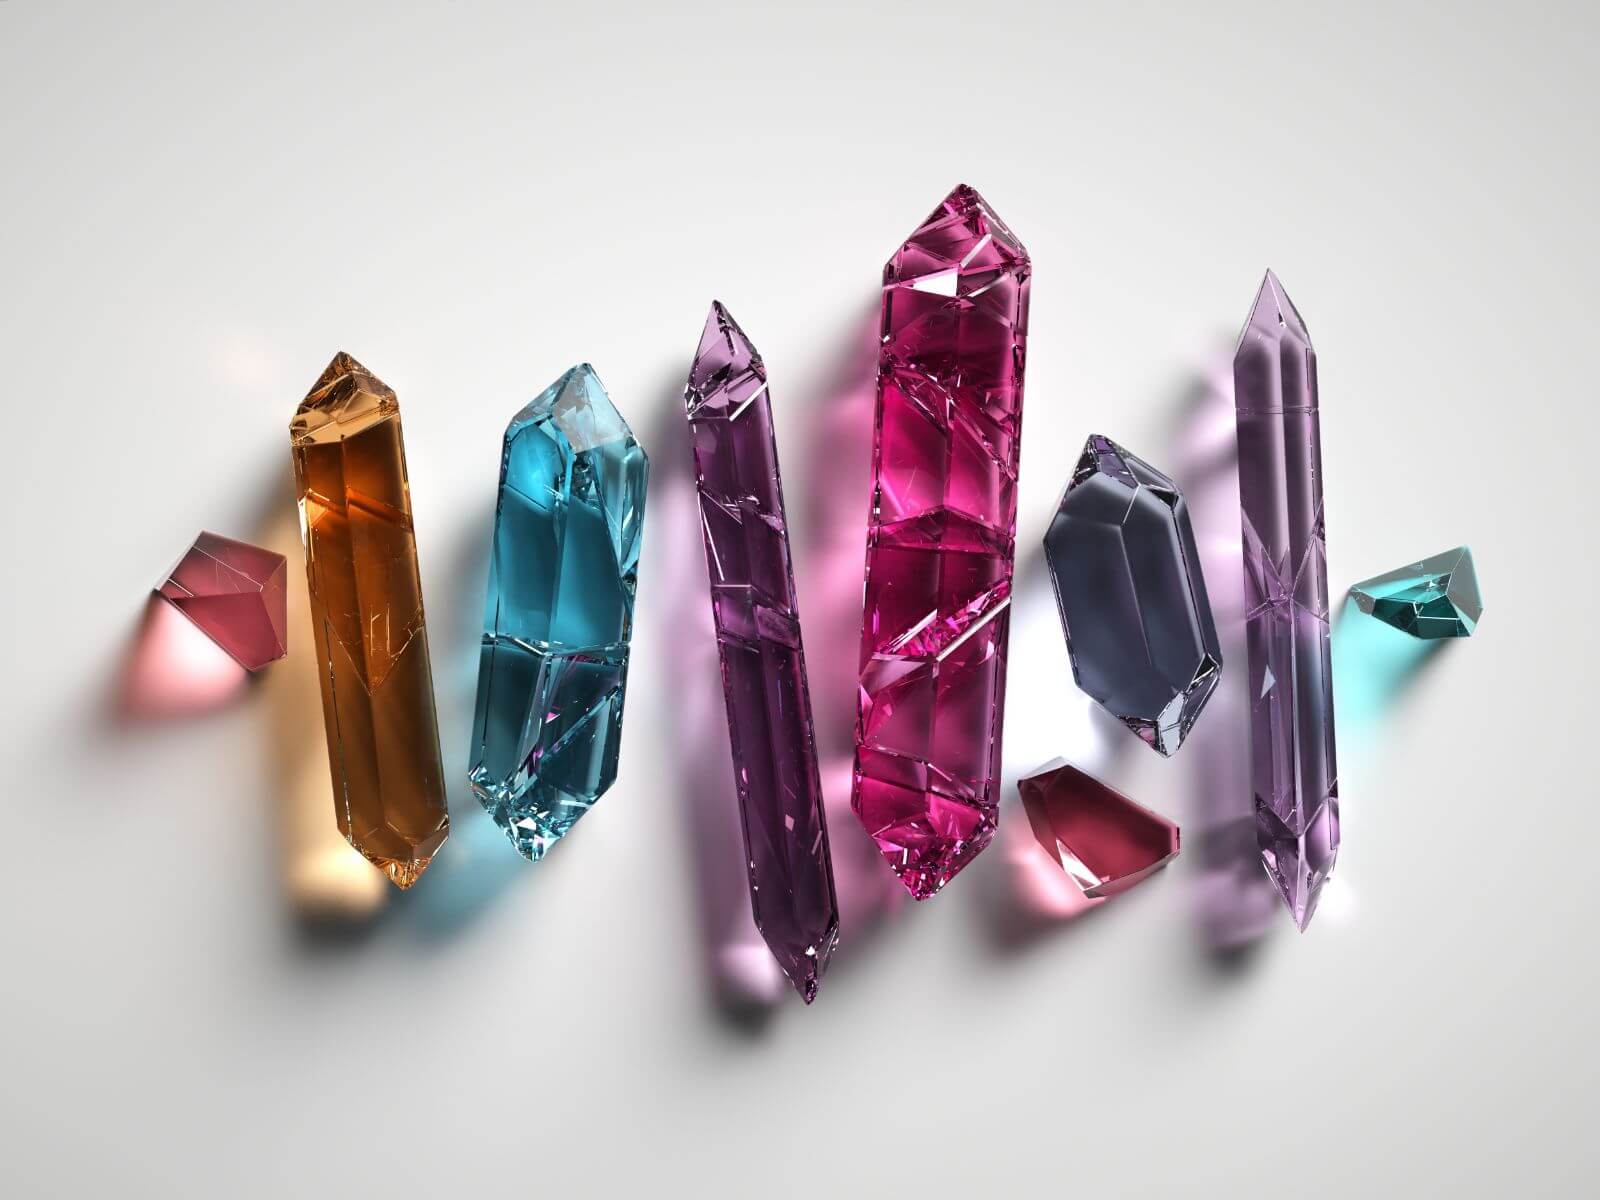 How Crystals are Formed & How Their Properties Affect Spirituality